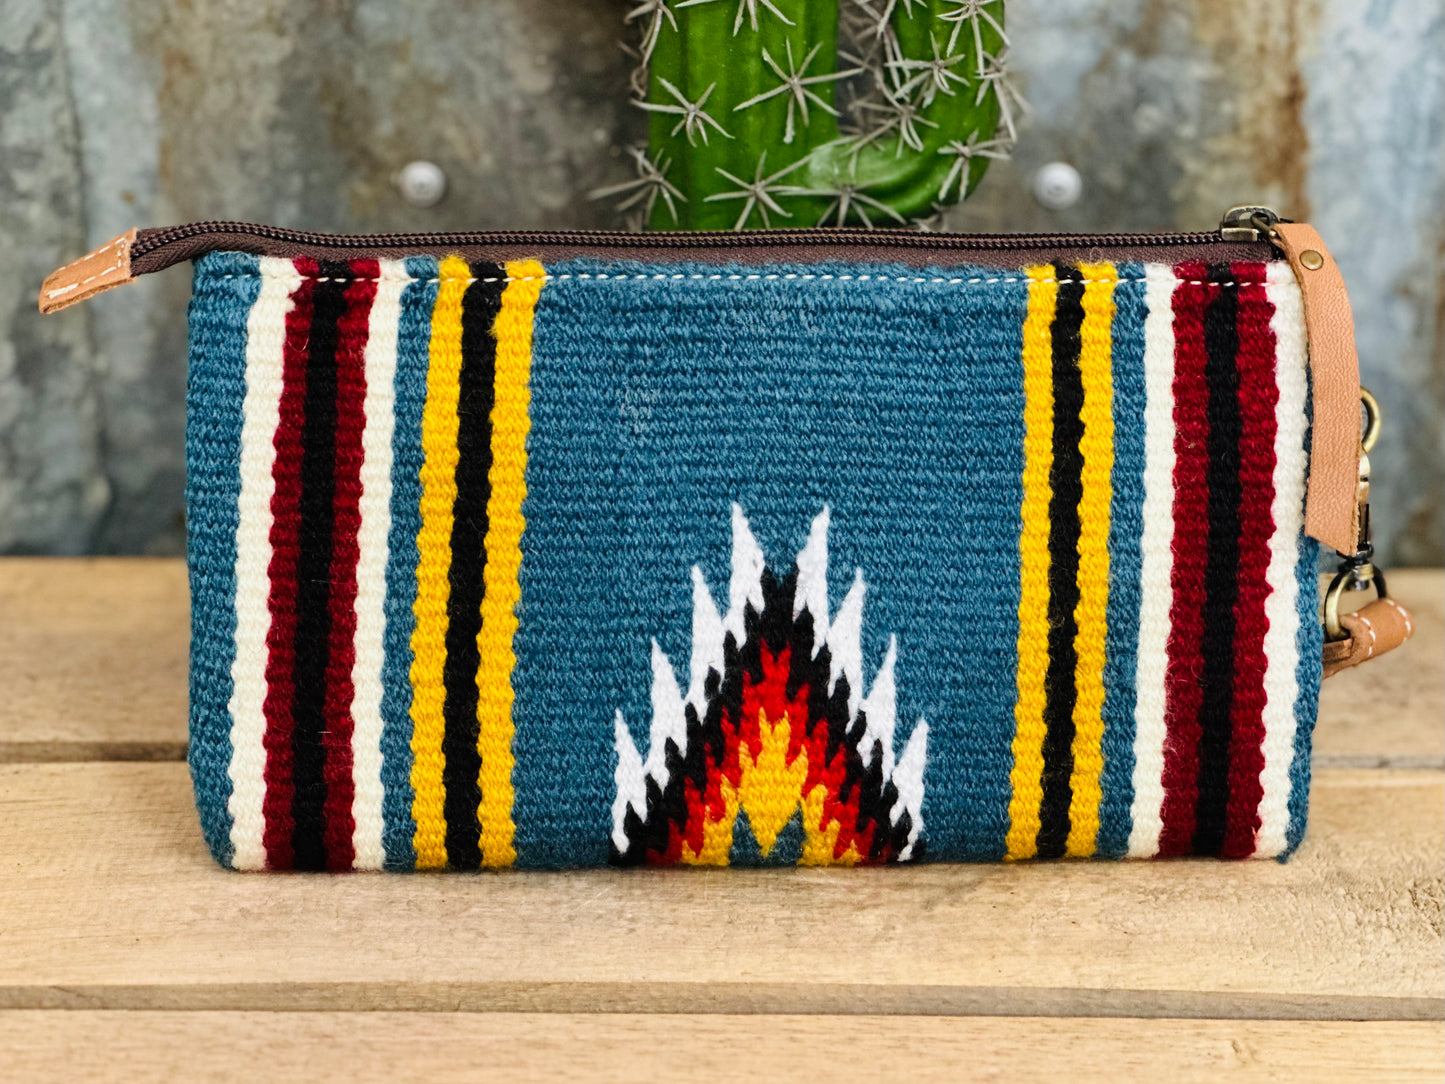 Blue Saddle Blanket Clutch with Brown Tooling Details